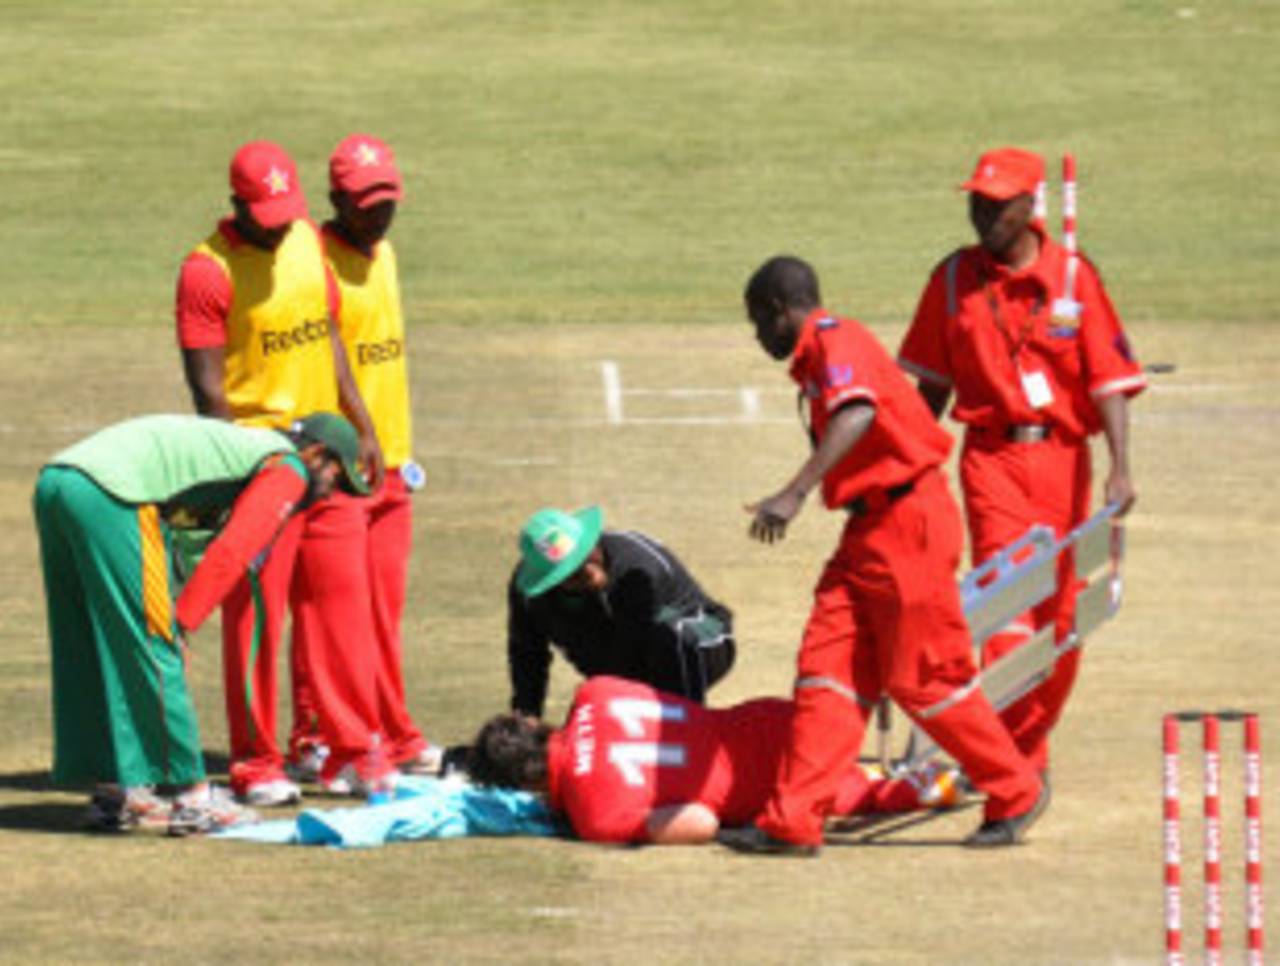 Meth lies on the ground after the blow that knocked four teeth out of his mouth&nbsp;&nbsp;&bull;&nbsp;&nbsp;Zimbabwe Cricket